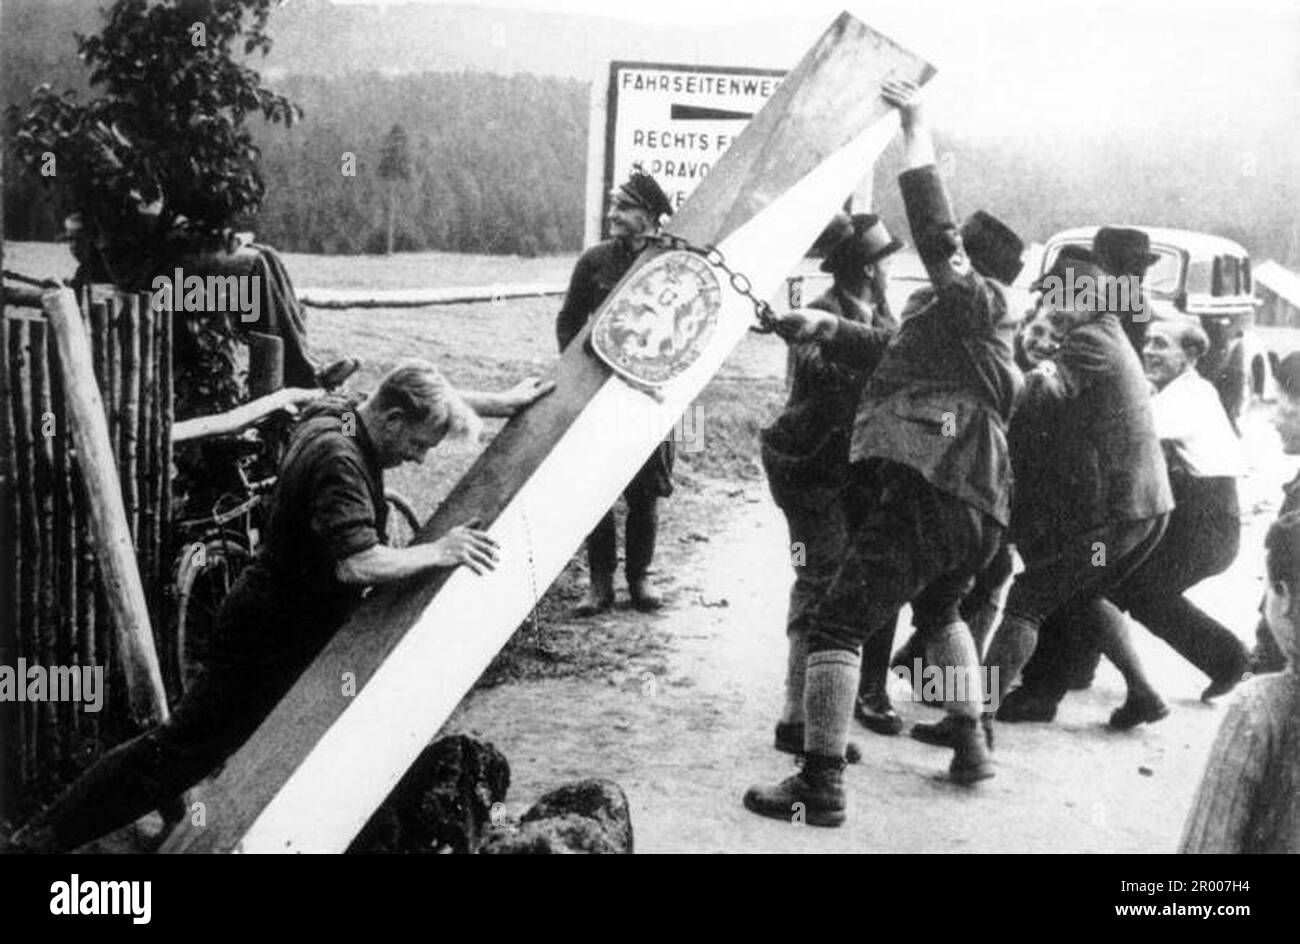 Henlein fascists (members of the Nazi party in the Sudetenland) remove the border posts on the German-Czechoslovak border in anticipation of the German invasion after the Munich agreement in September 1938. Bundesarchiv, Bild 183-58507-003 / CC-BY-SA 3.0 Stock Photo